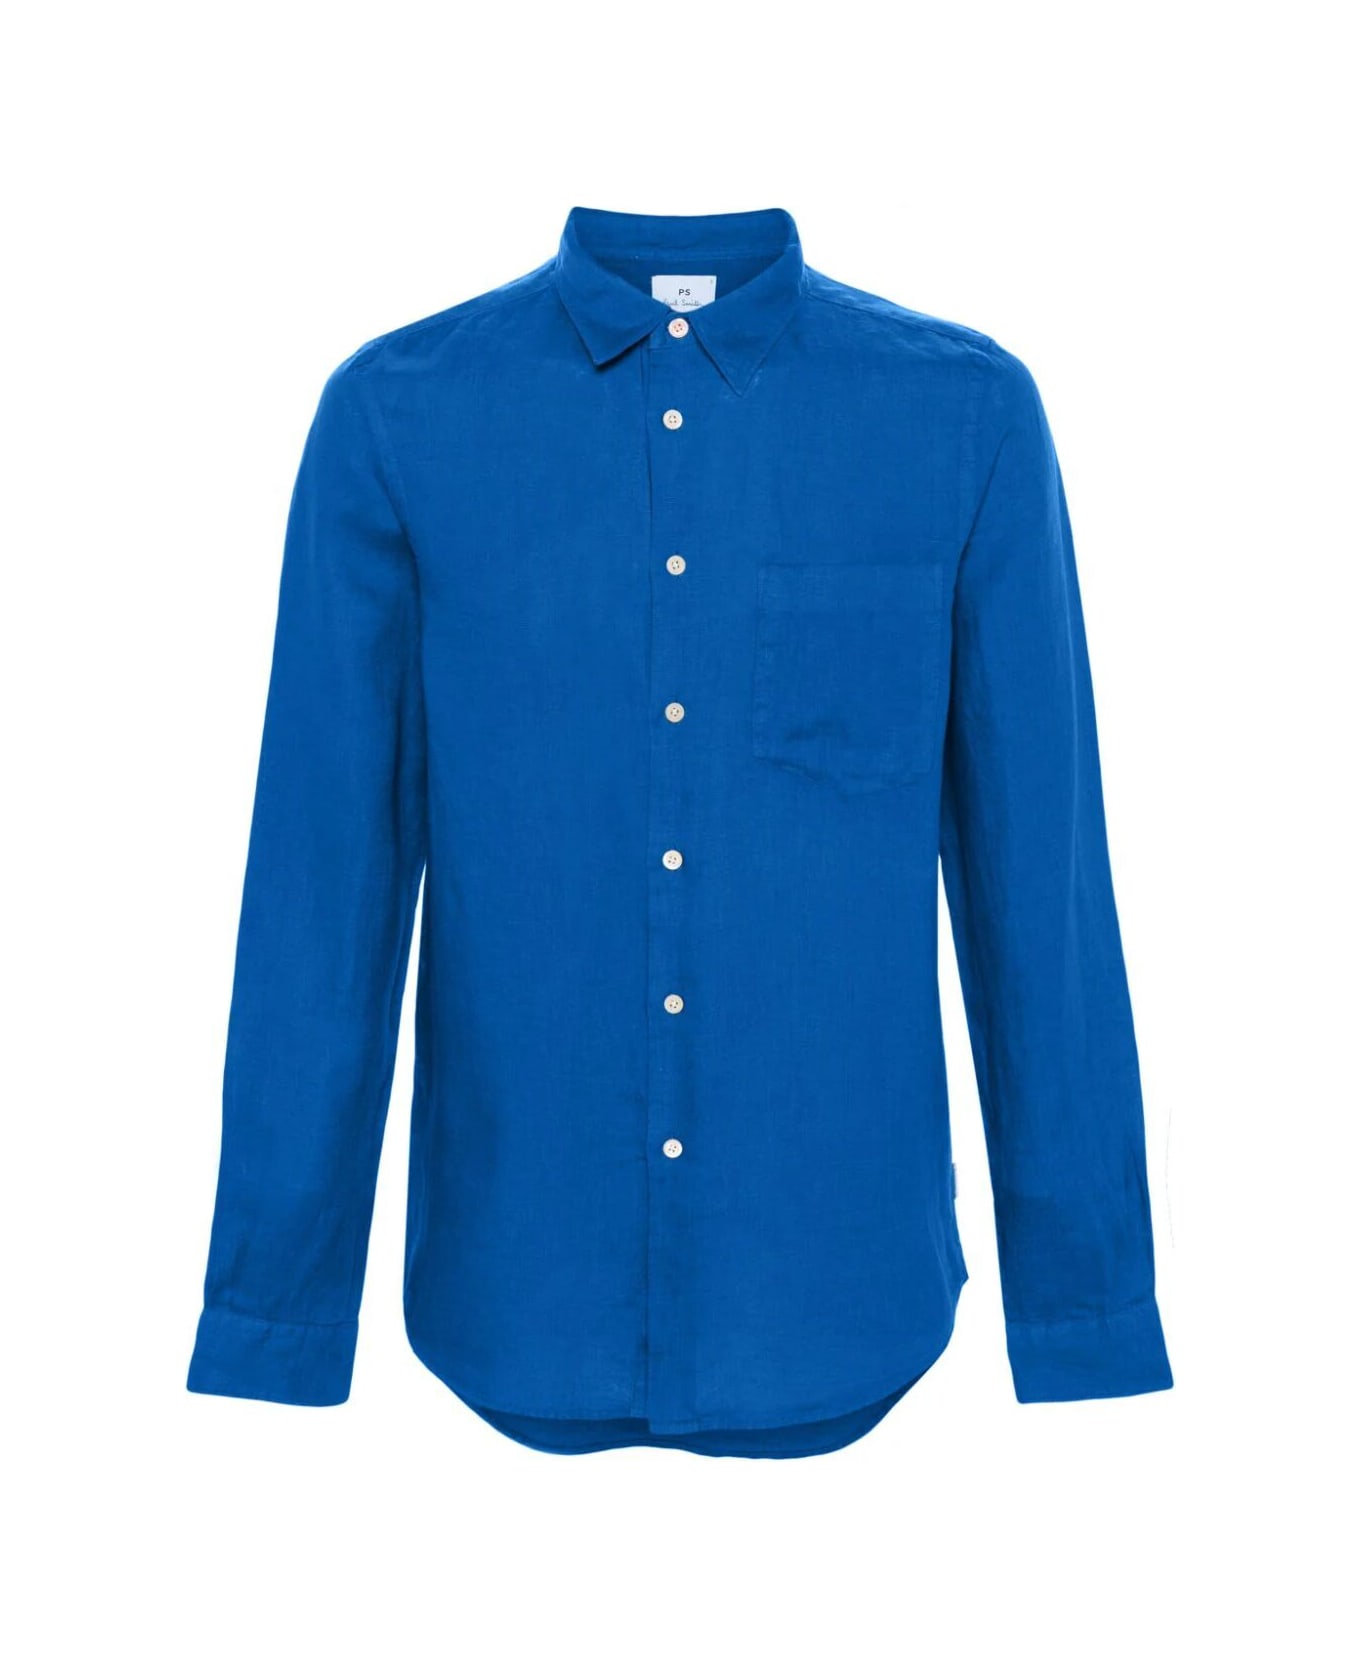 PS by Paul Smith Mens Ls Tailored Fit Shirt - Blues シャツ